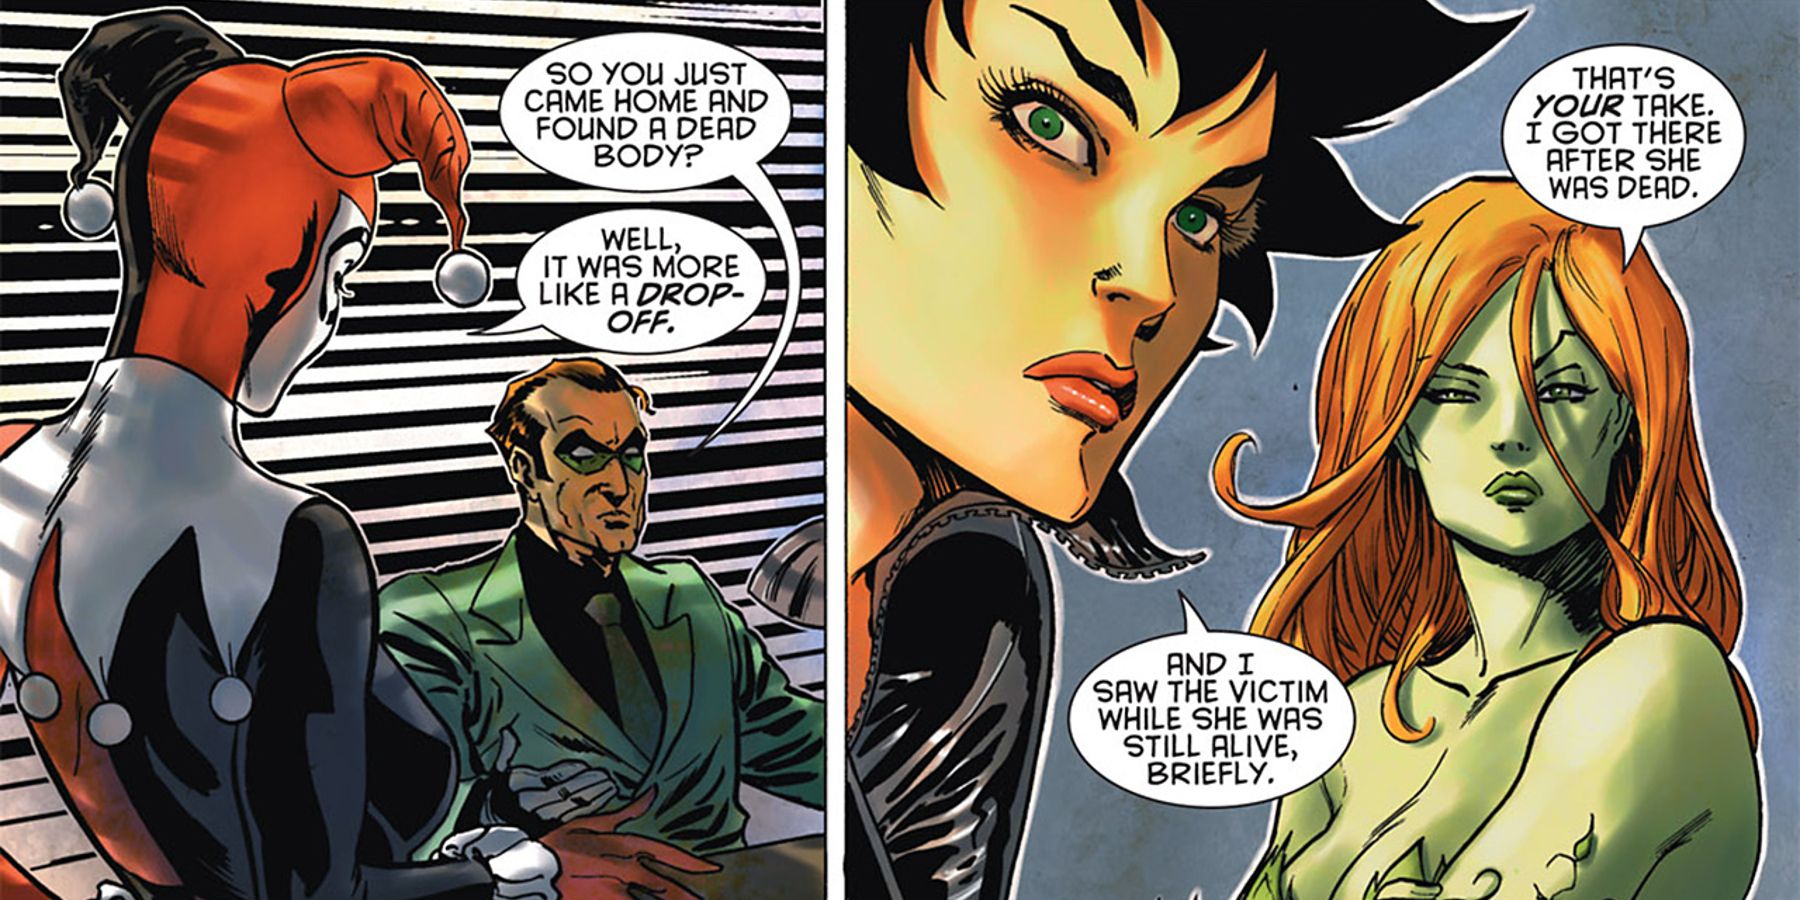 Riddler gathering information about the case from the Sirens in Gotham City Sirens #9